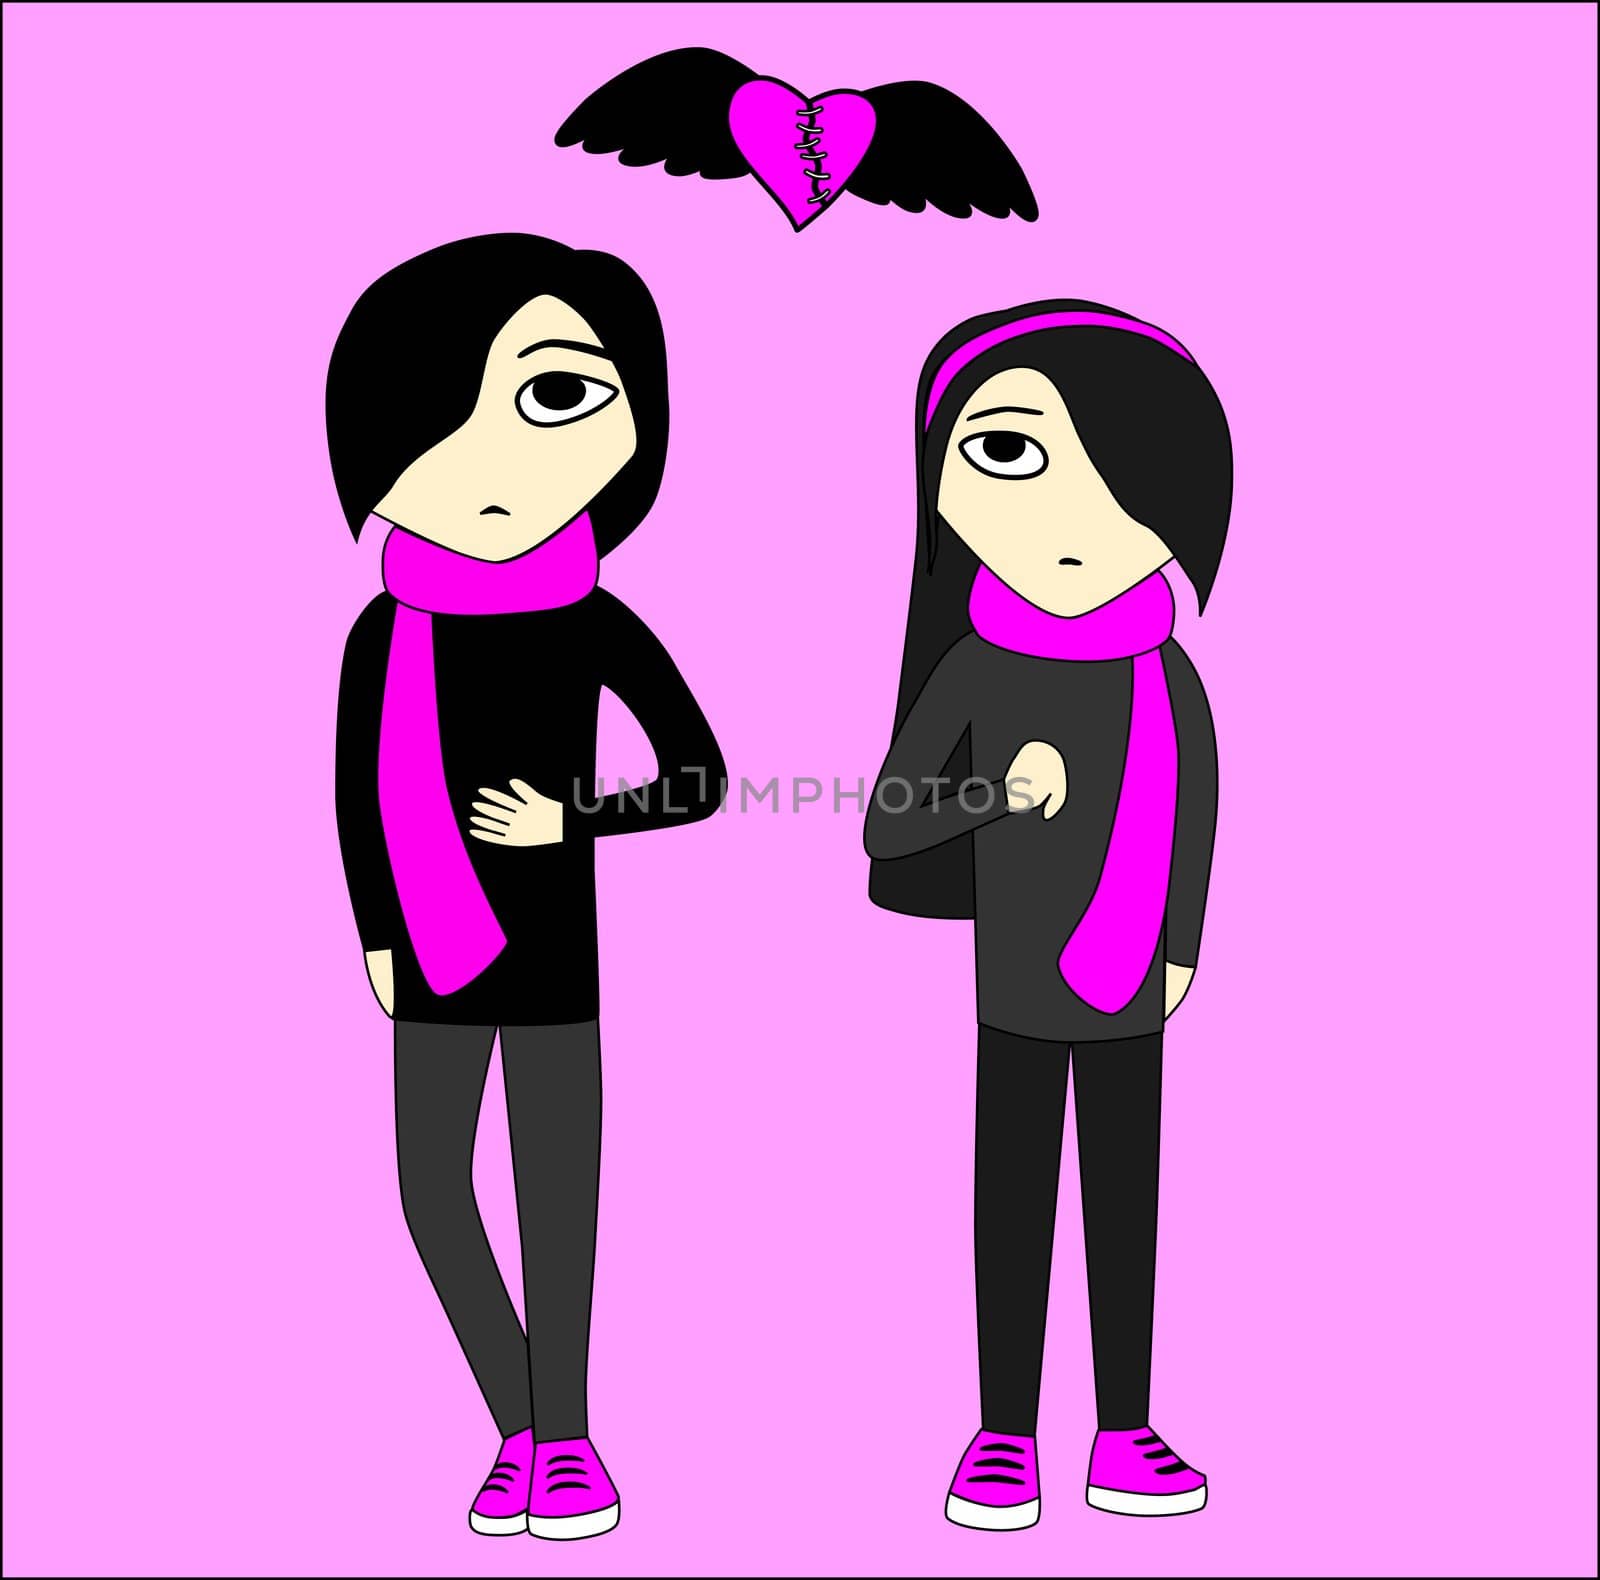 Emo boy and girl in black and pink colors